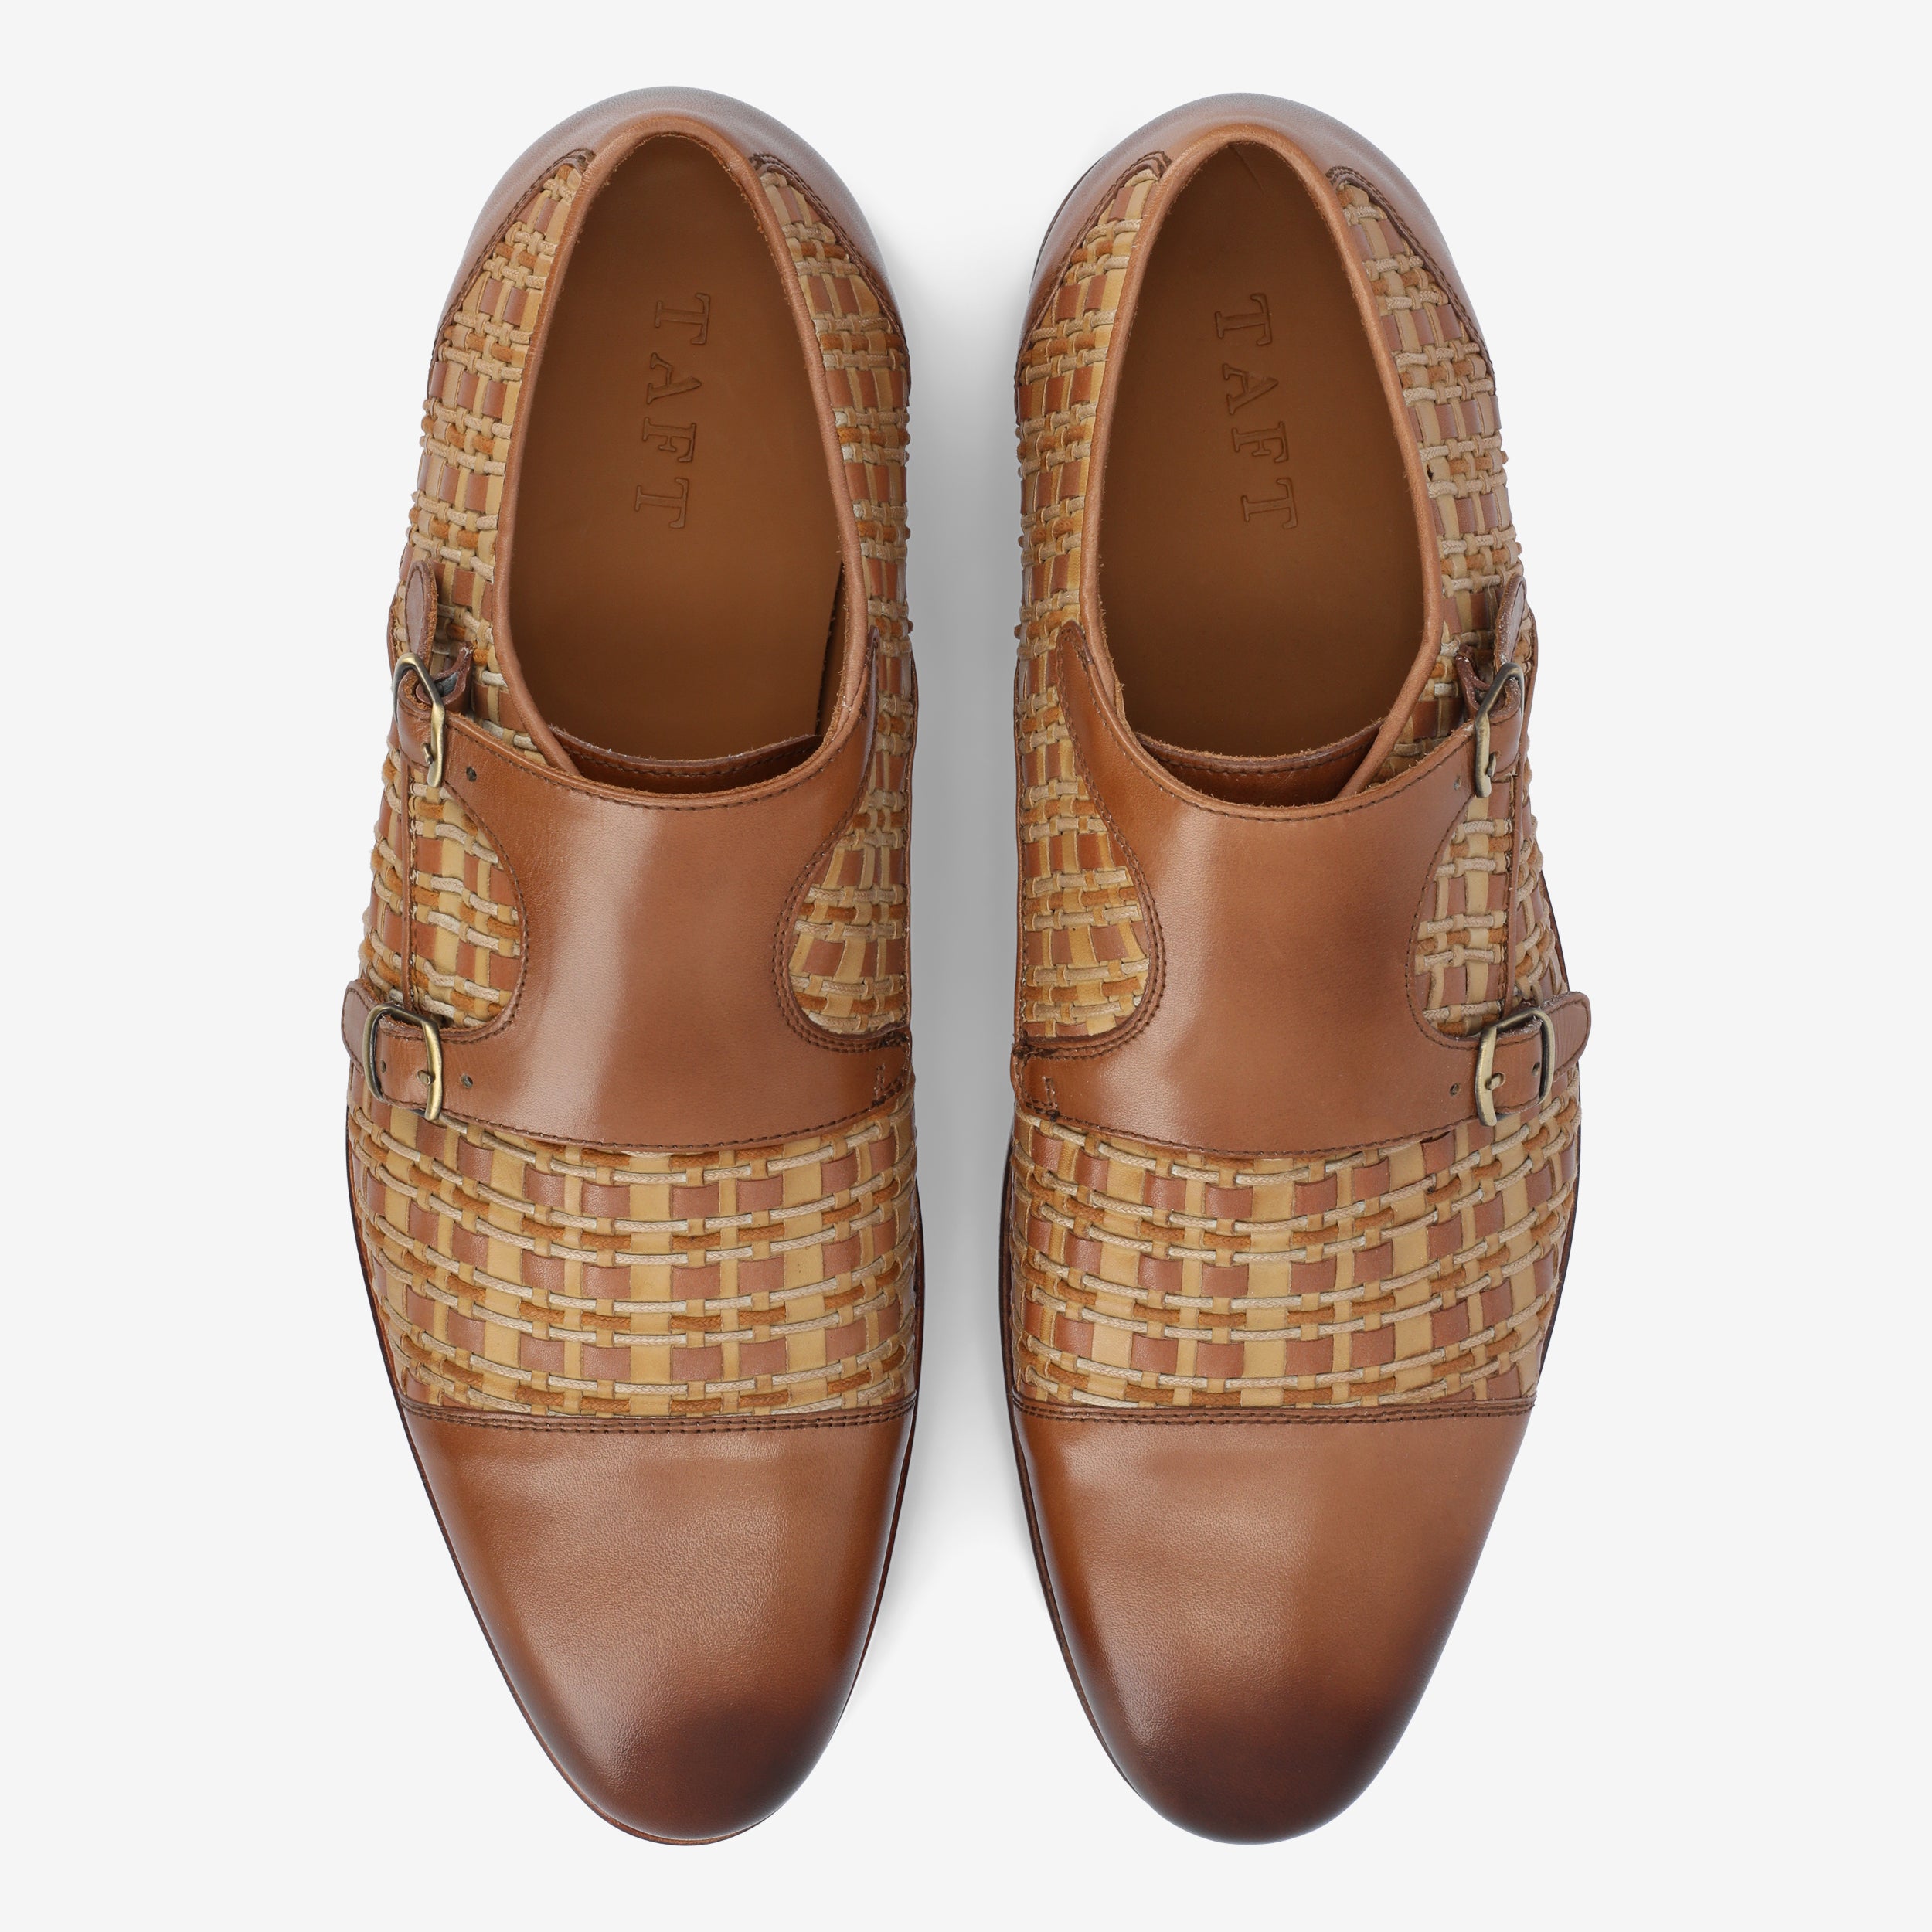 Lucca leather moccasins